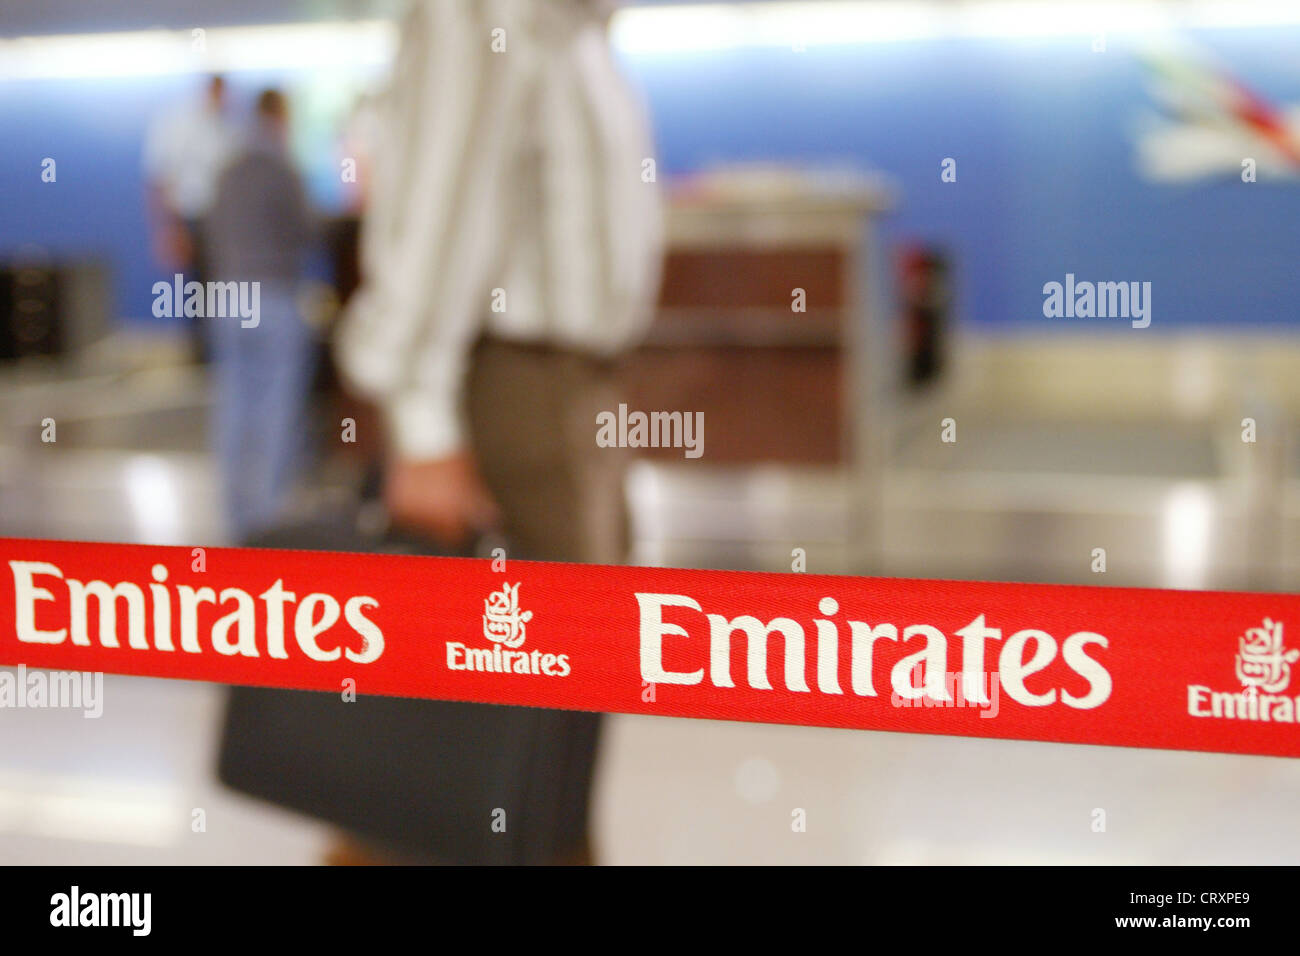 Check in at the counter of Emirates Airlines in Dubai airport. Stock Photo